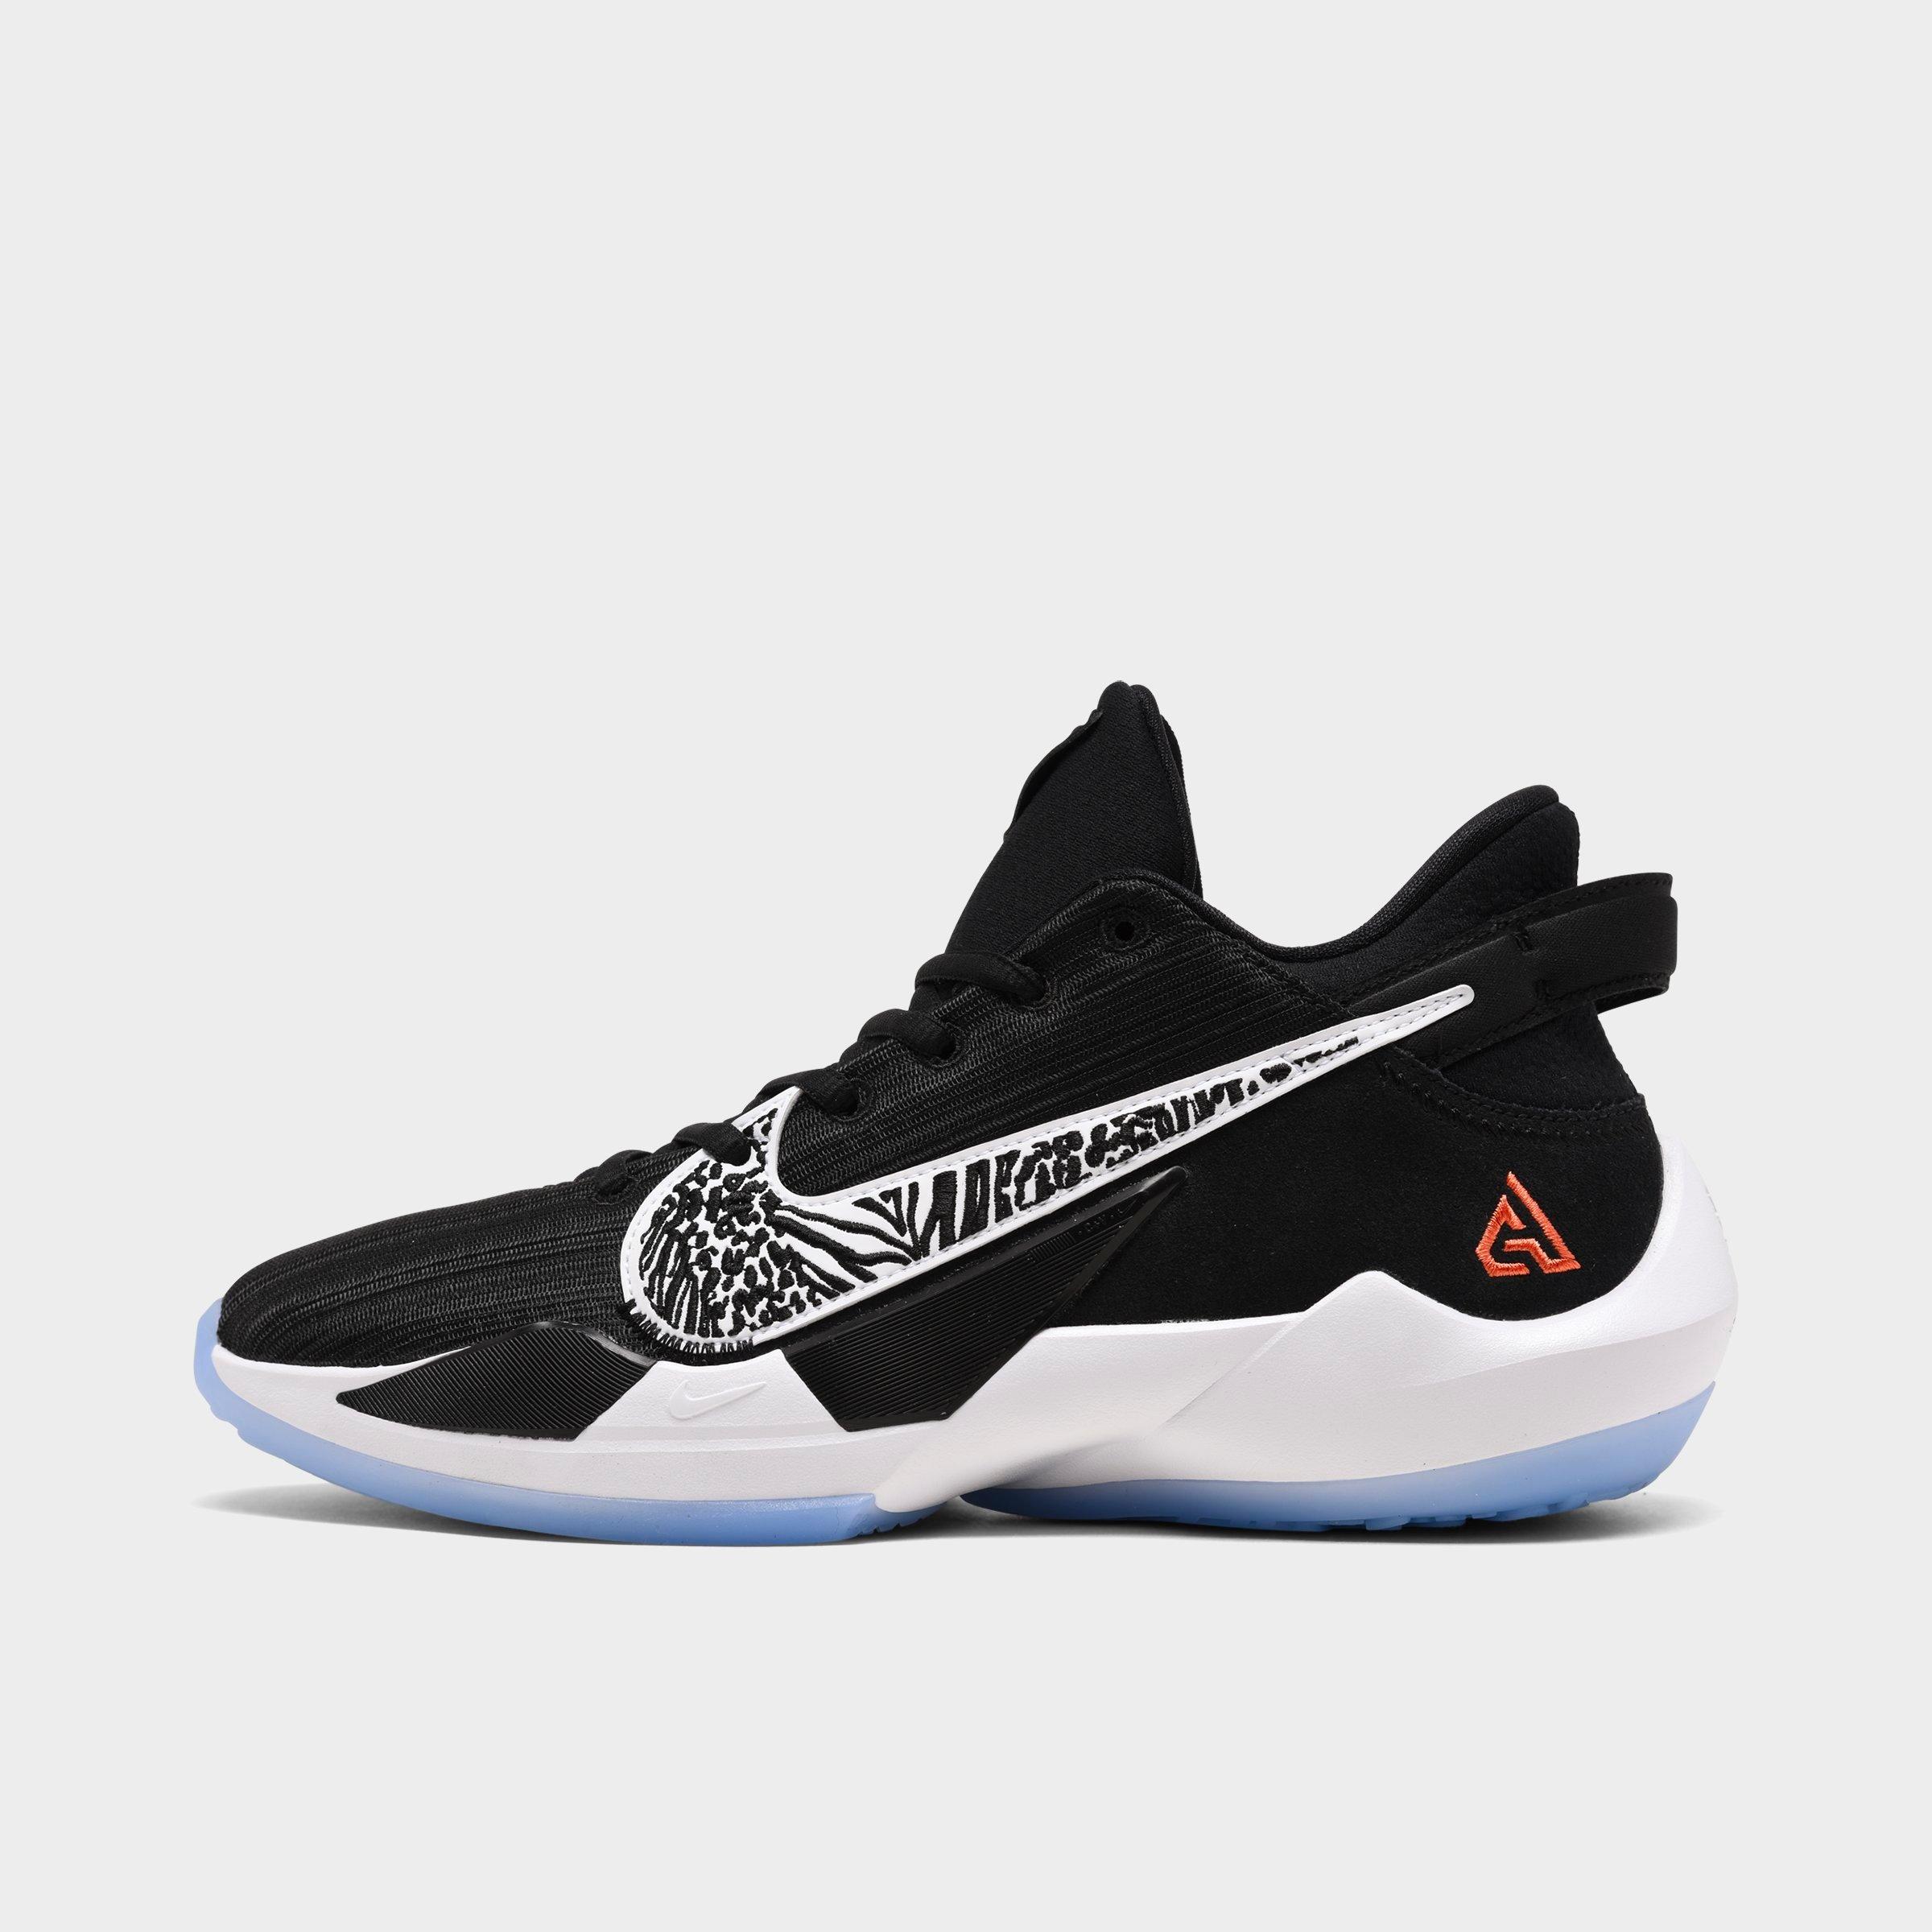 finish line youth basketball shoes